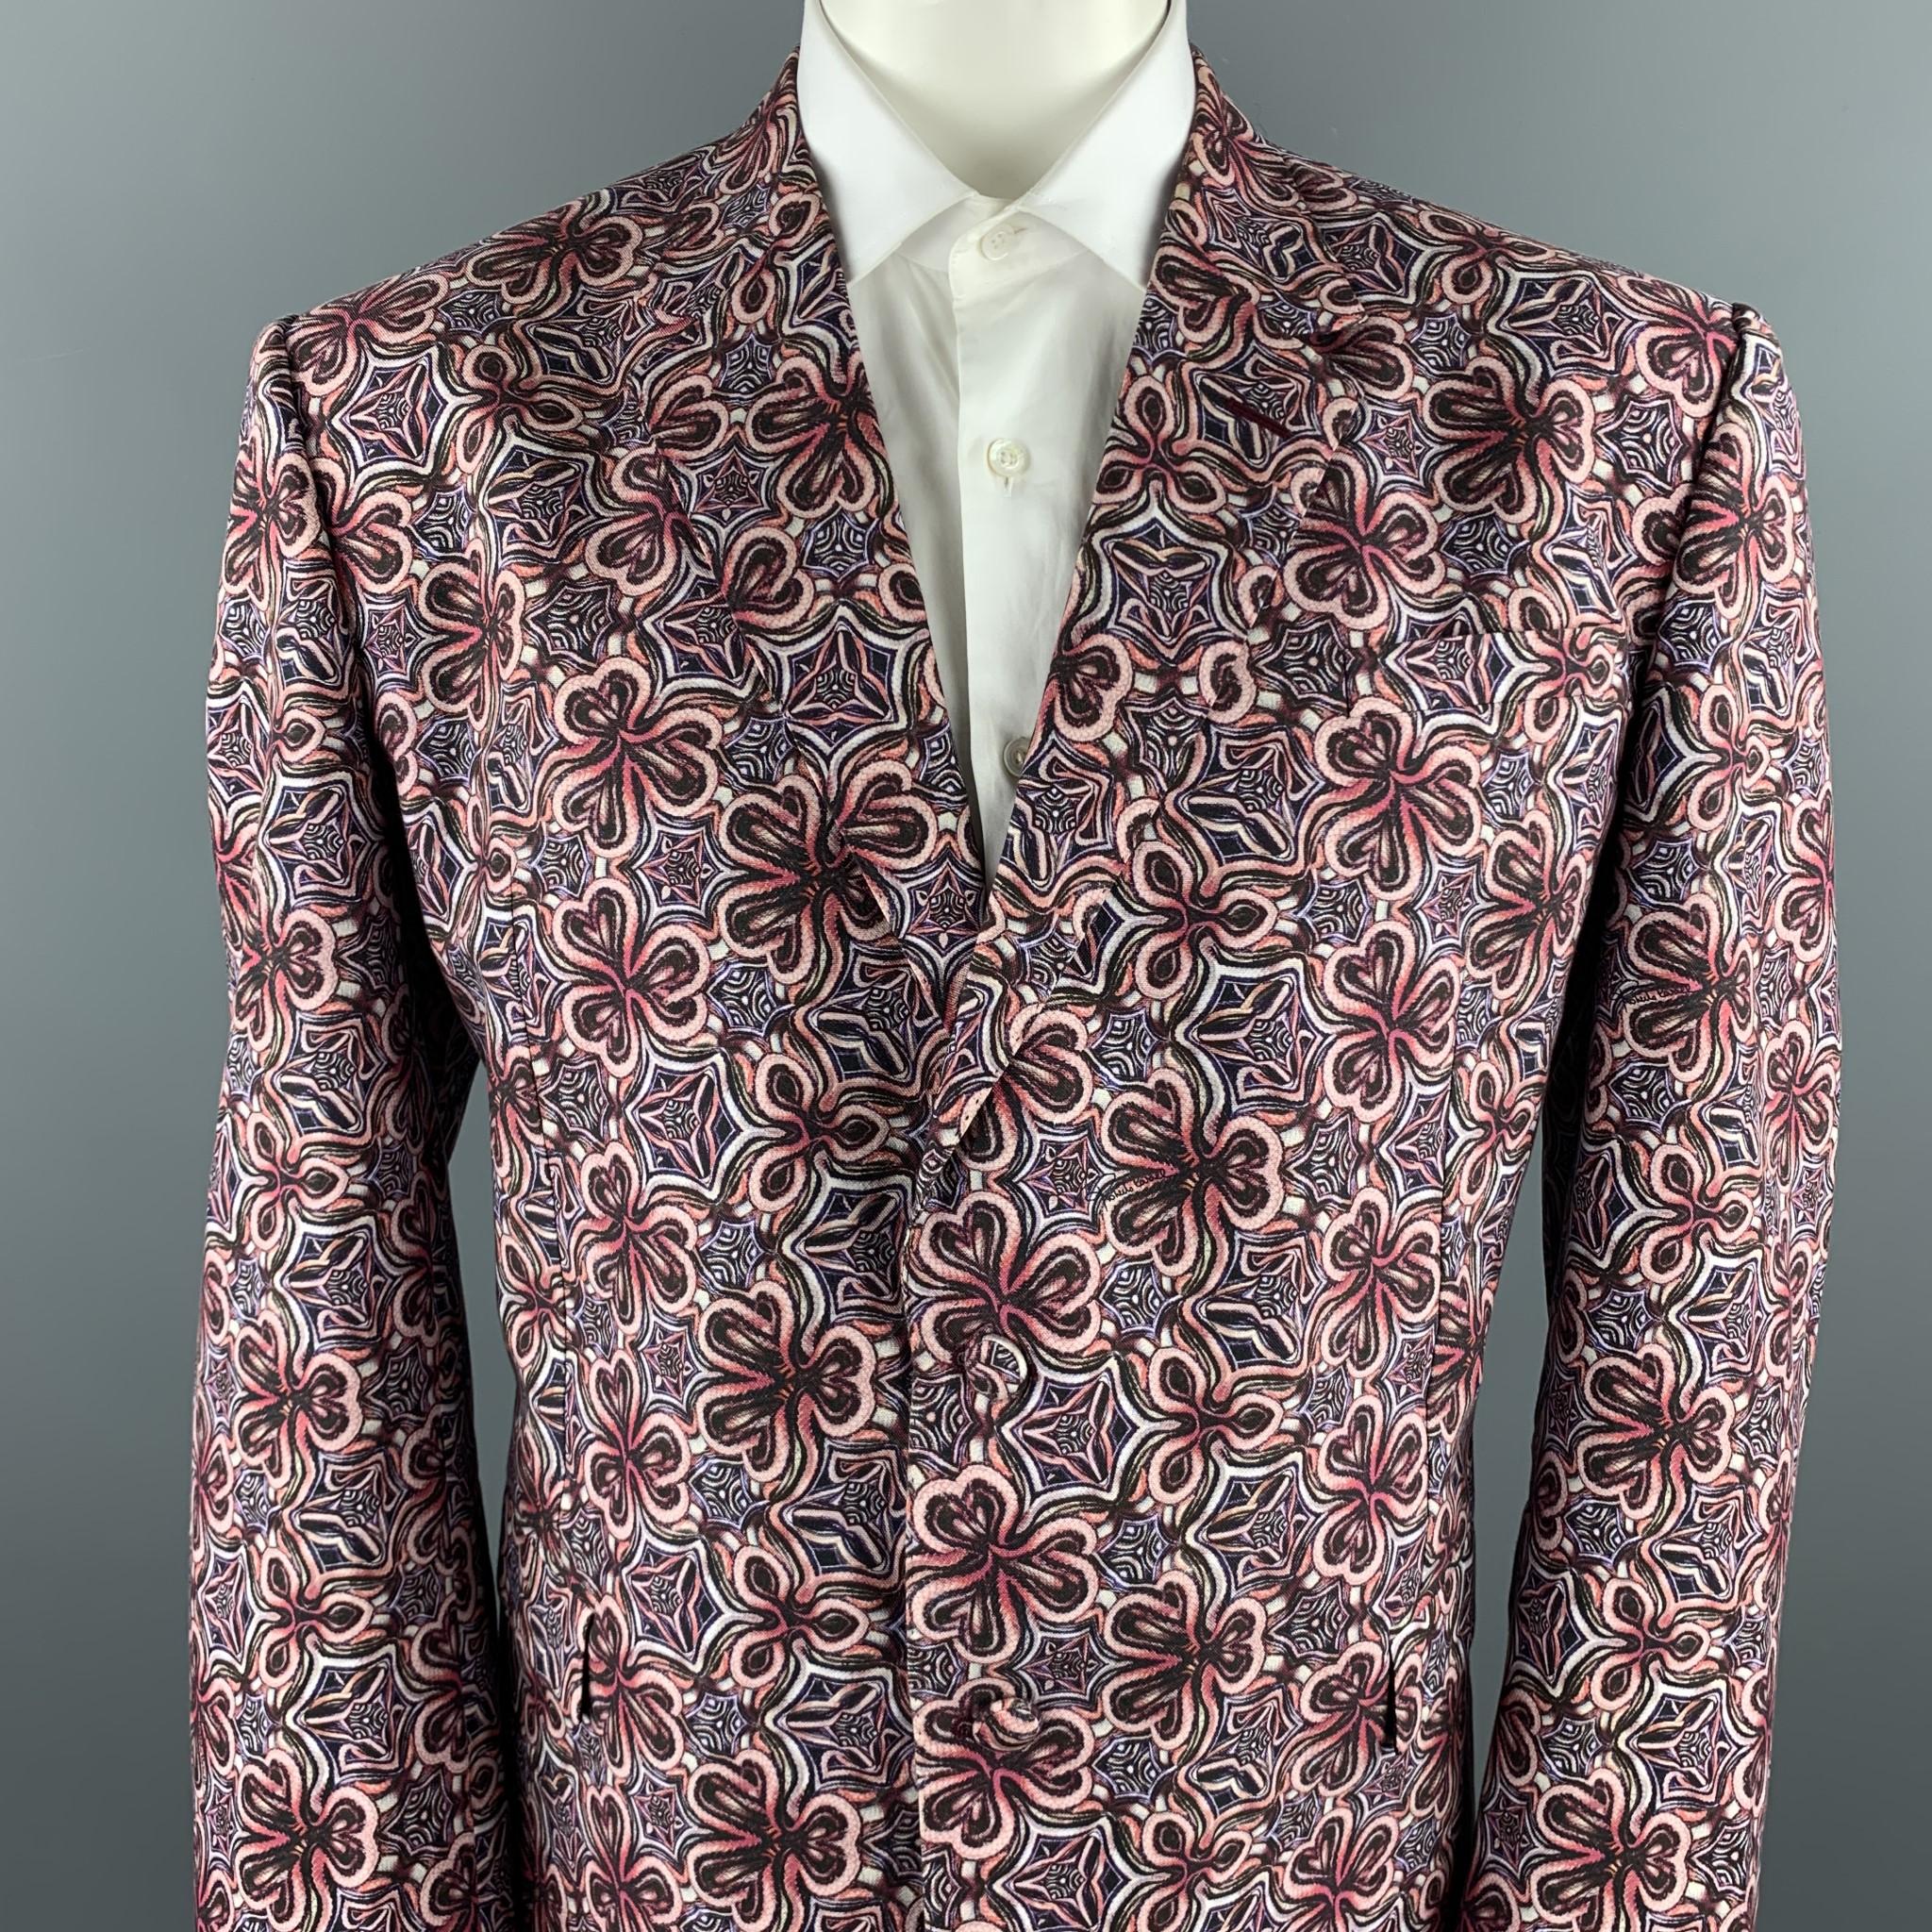 ROBERTO CAVALLI sport coat comes in a brick & purple cotton / silk with a all over abstract print featuring a notch lapel style, flap pockets, and a two button closure. Made in Italy.  Retail: $2725

New With Tags. 
Marked: IT